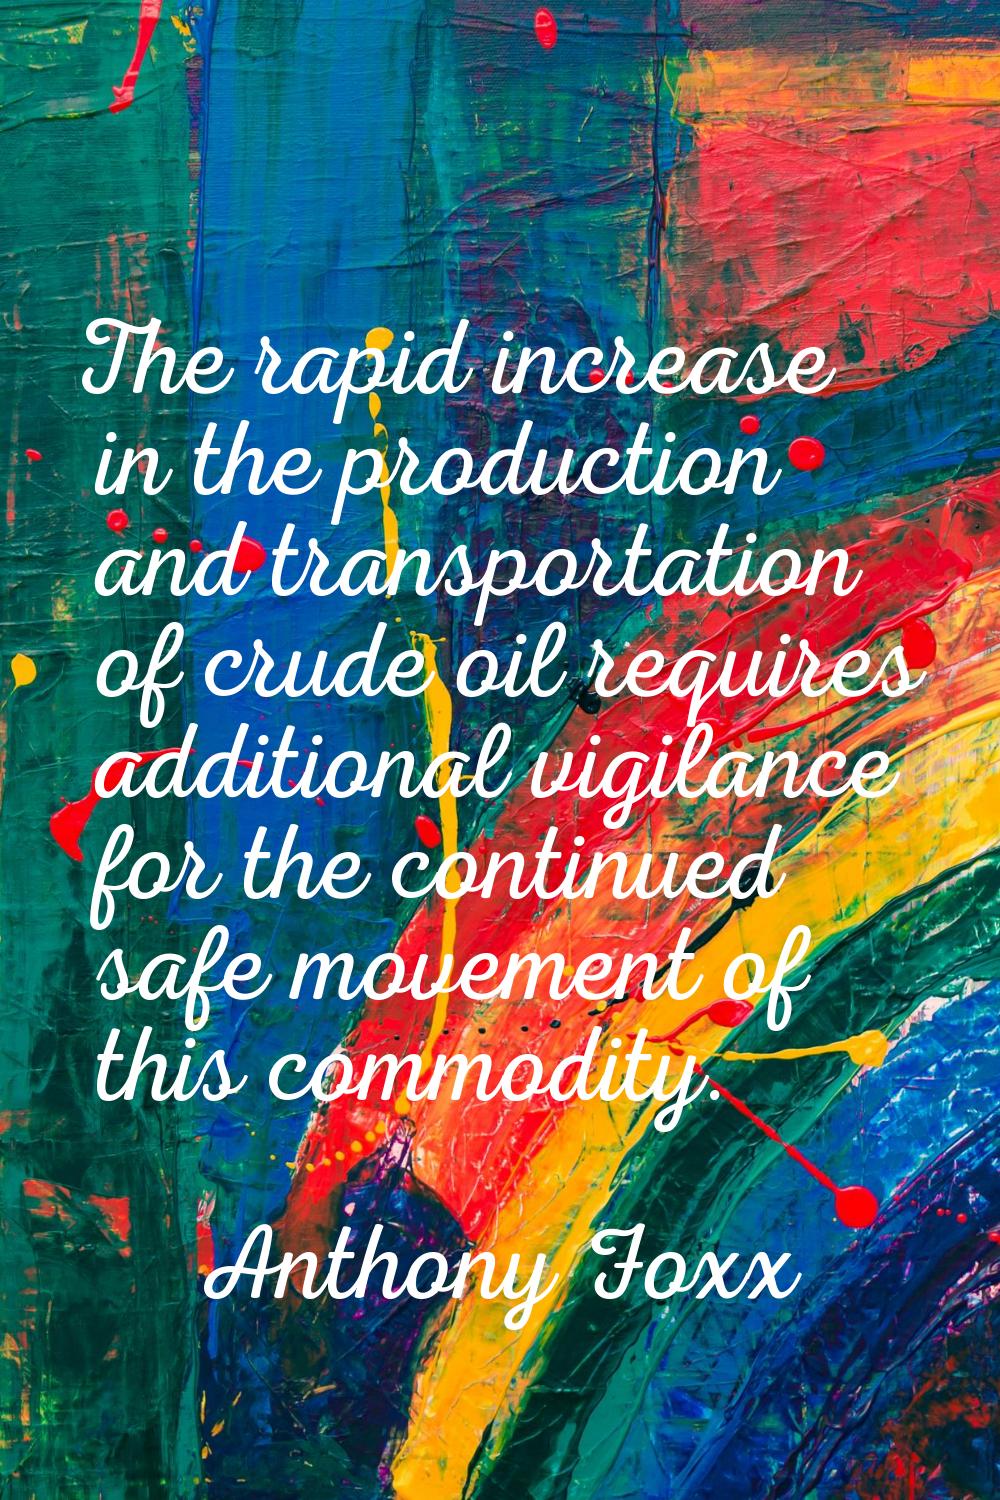 The rapid increase in the production and transportation of crude oil requires additional vigilance 